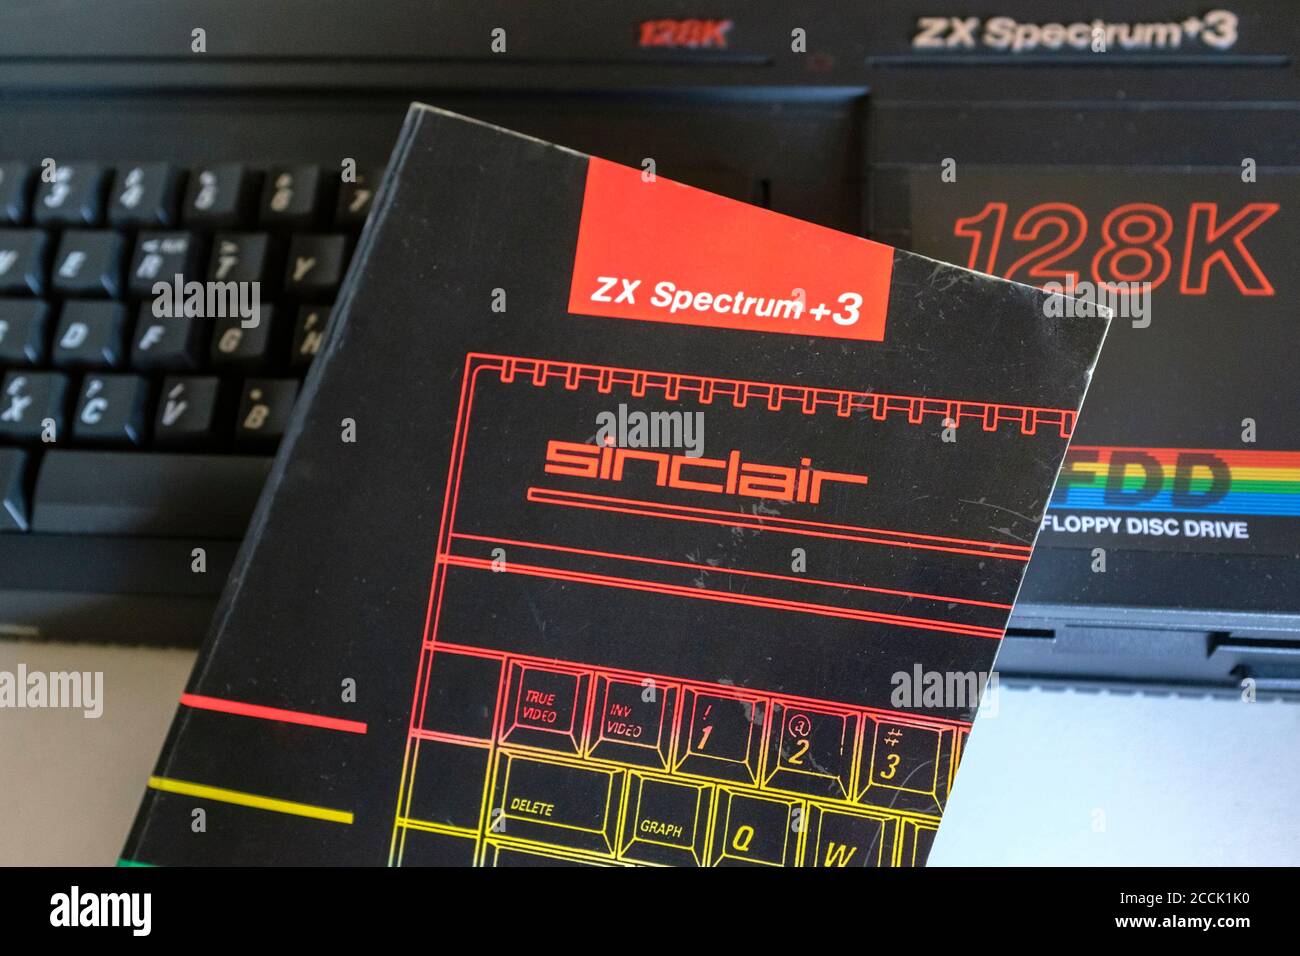 Owners manual for the Sinclair ZX Spectrum +3 personal computer, launched in the UK in 1987. Stock Photo